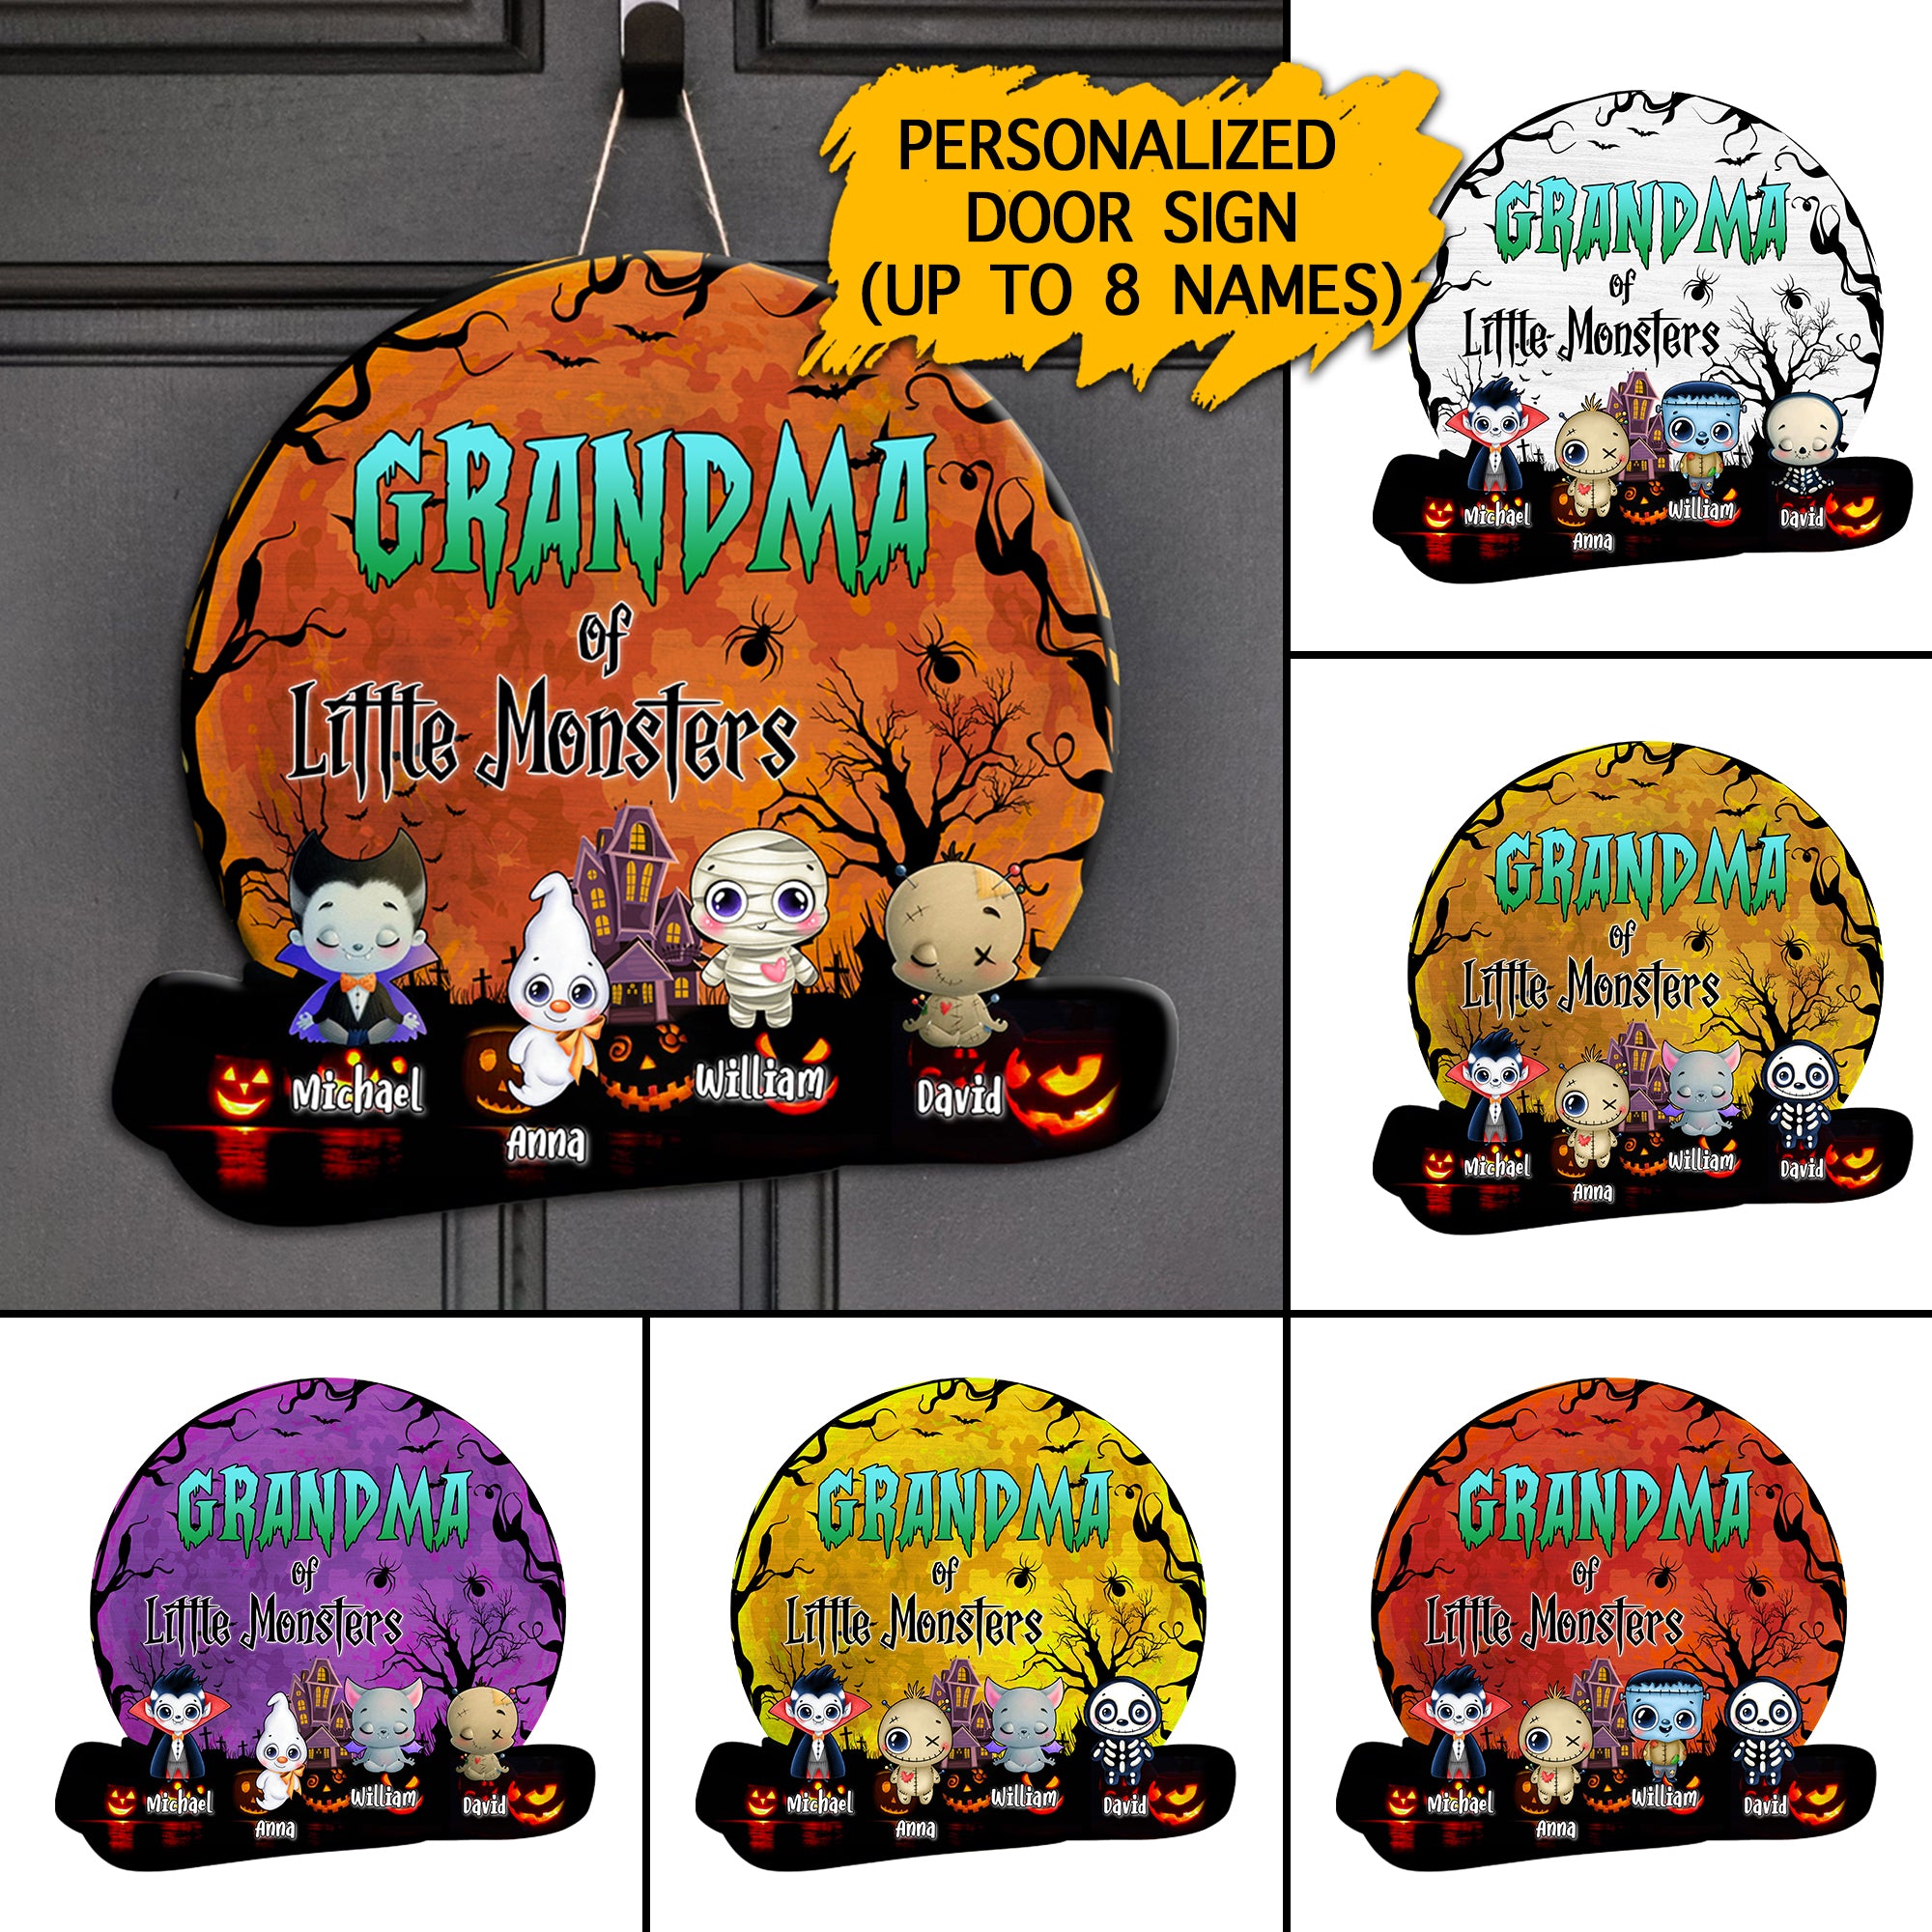 Little Monsters - Custom Appearance And Name - Personalized Wooden Door Sign - Halloween Gift